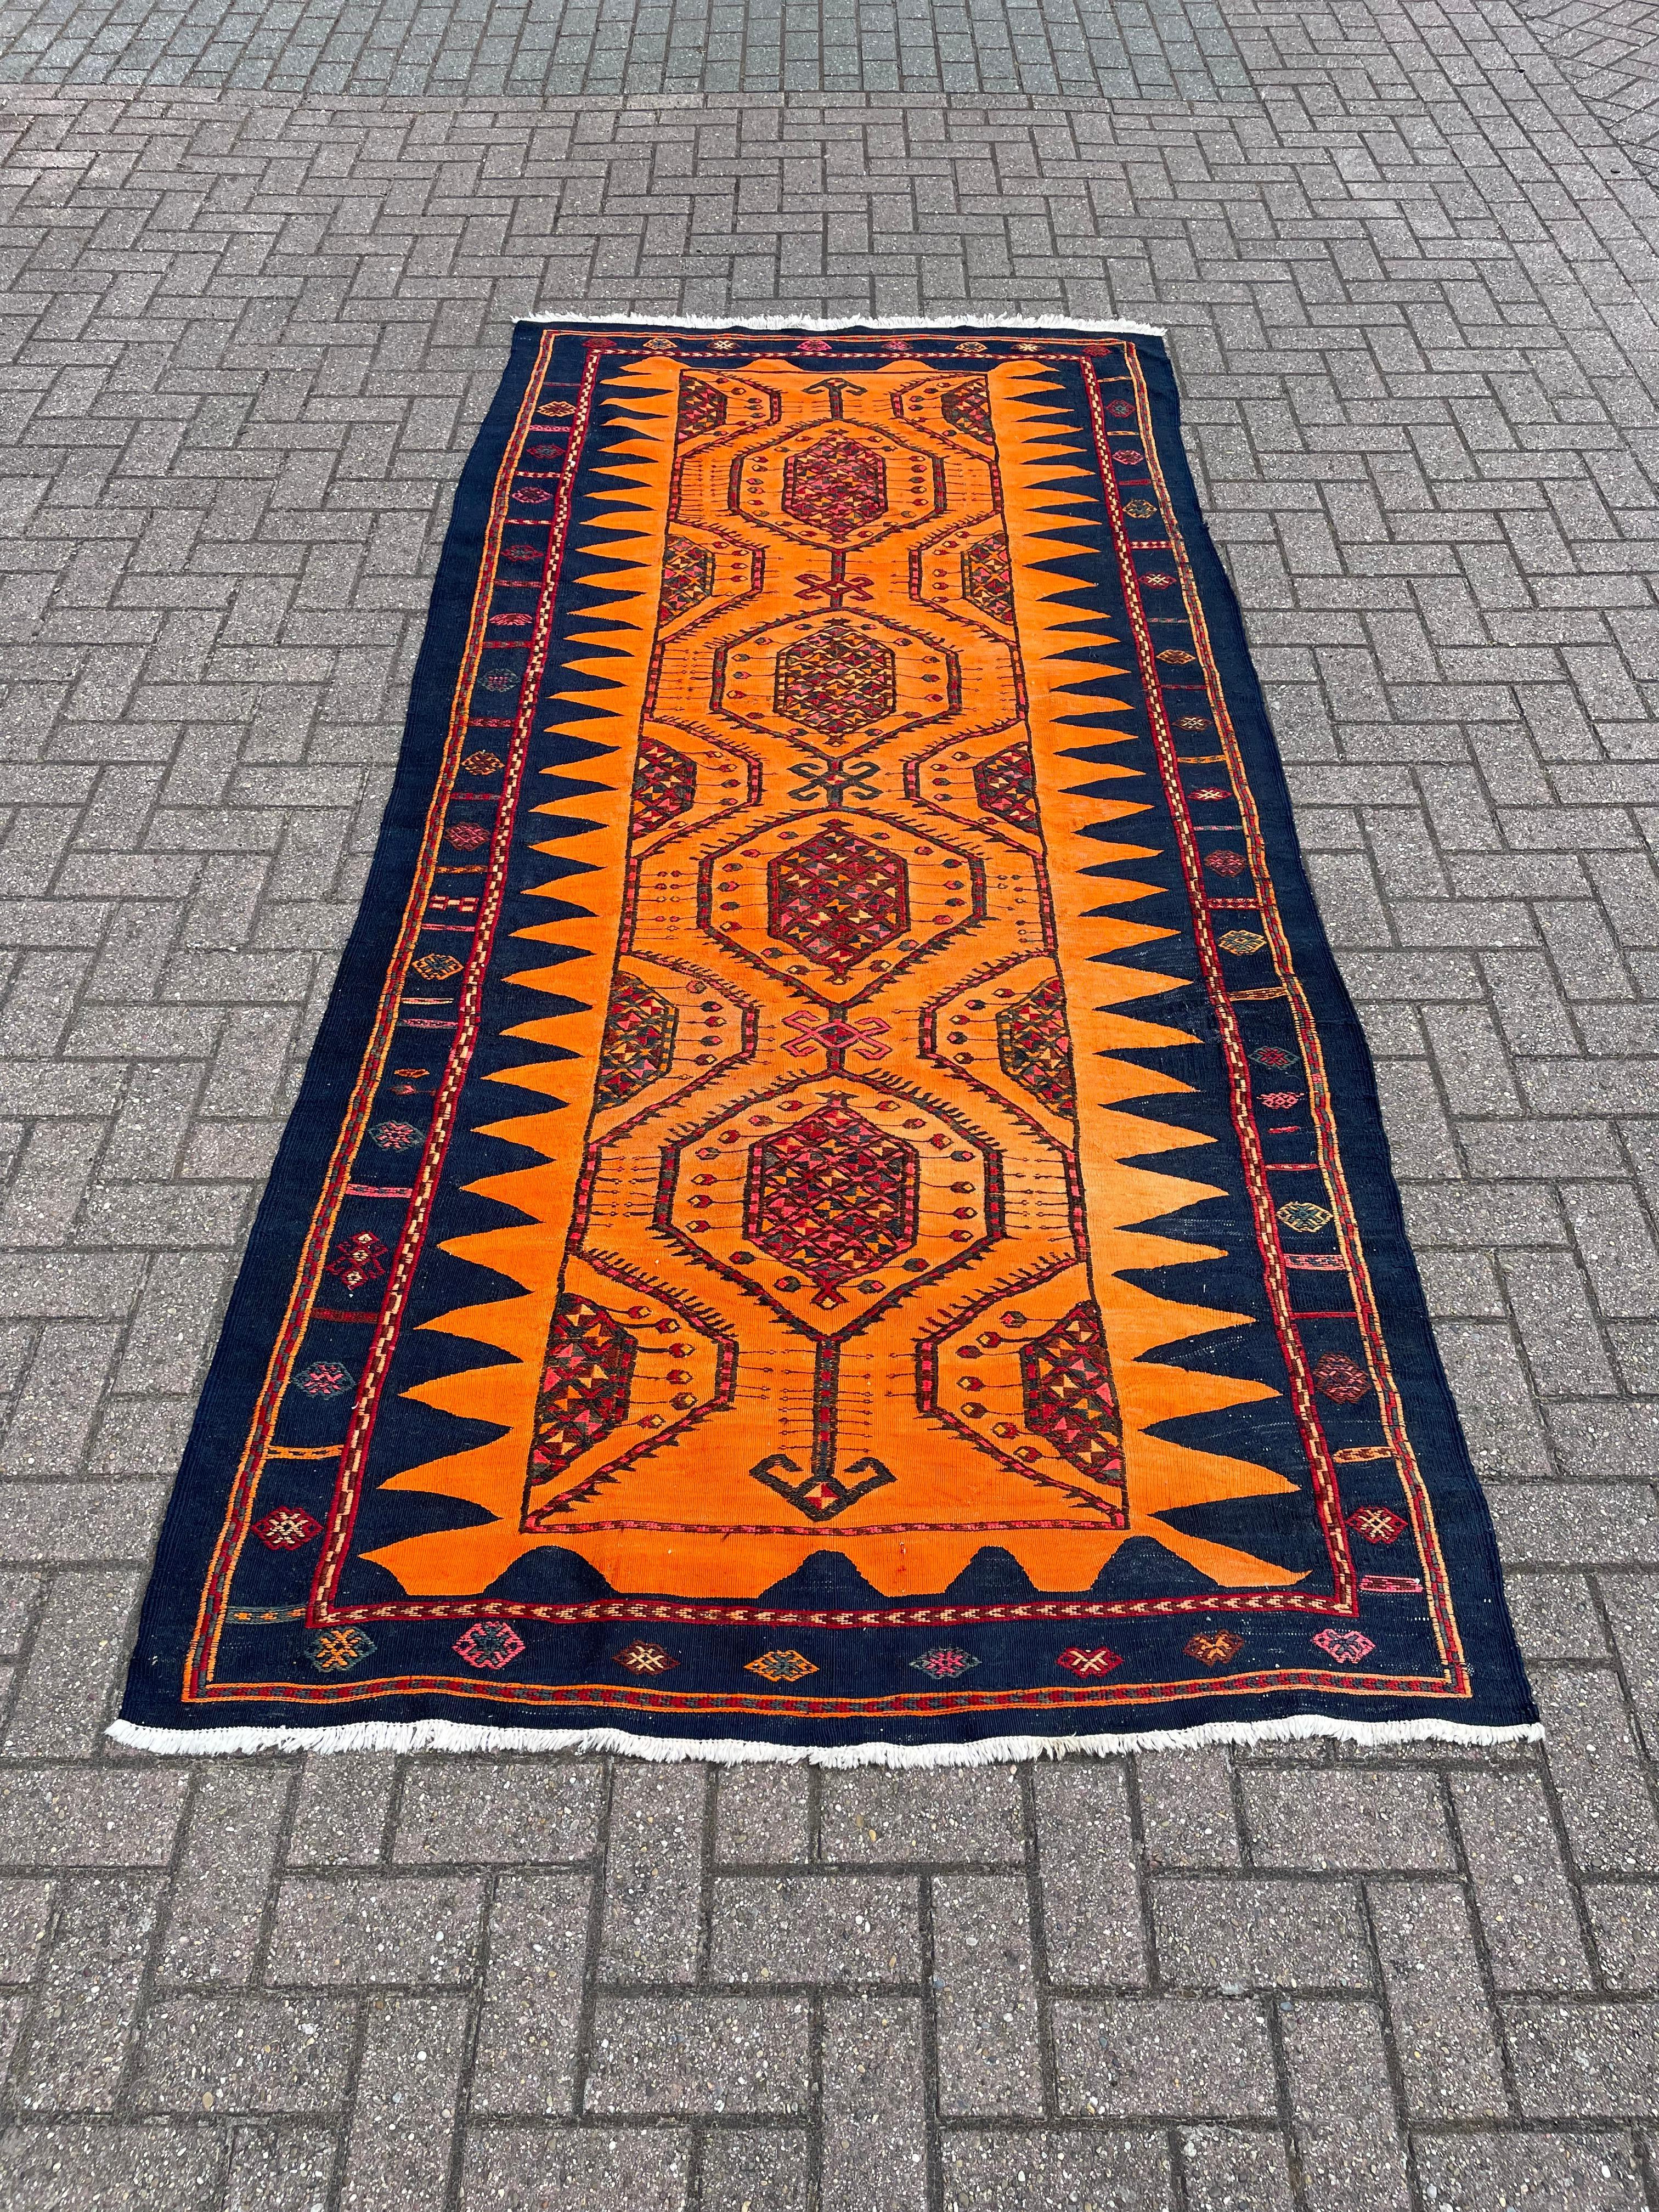 Stunning & Large Size Hand Knotted Kilim Rug Midcentury Design w. Vibrant Colors For Sale 9